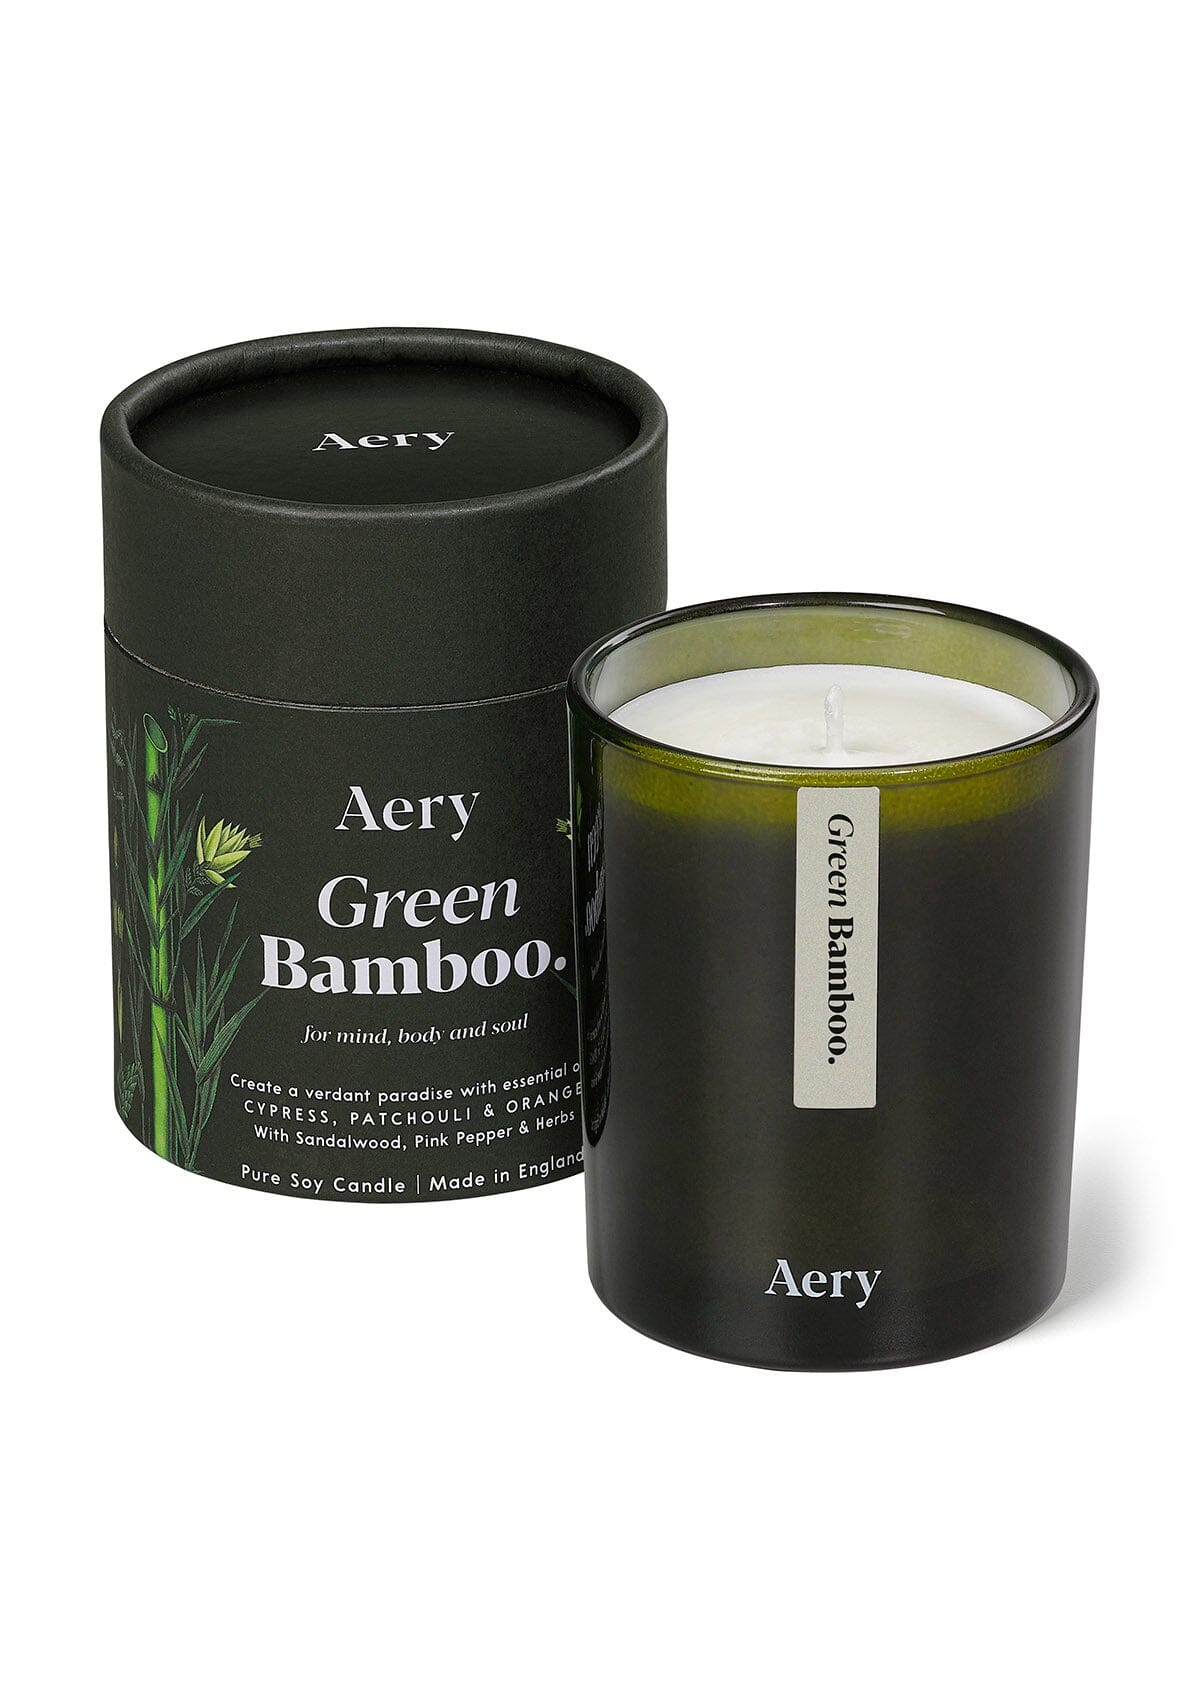 Green Bamboo candle by Aery displayed next to product packaging on white background